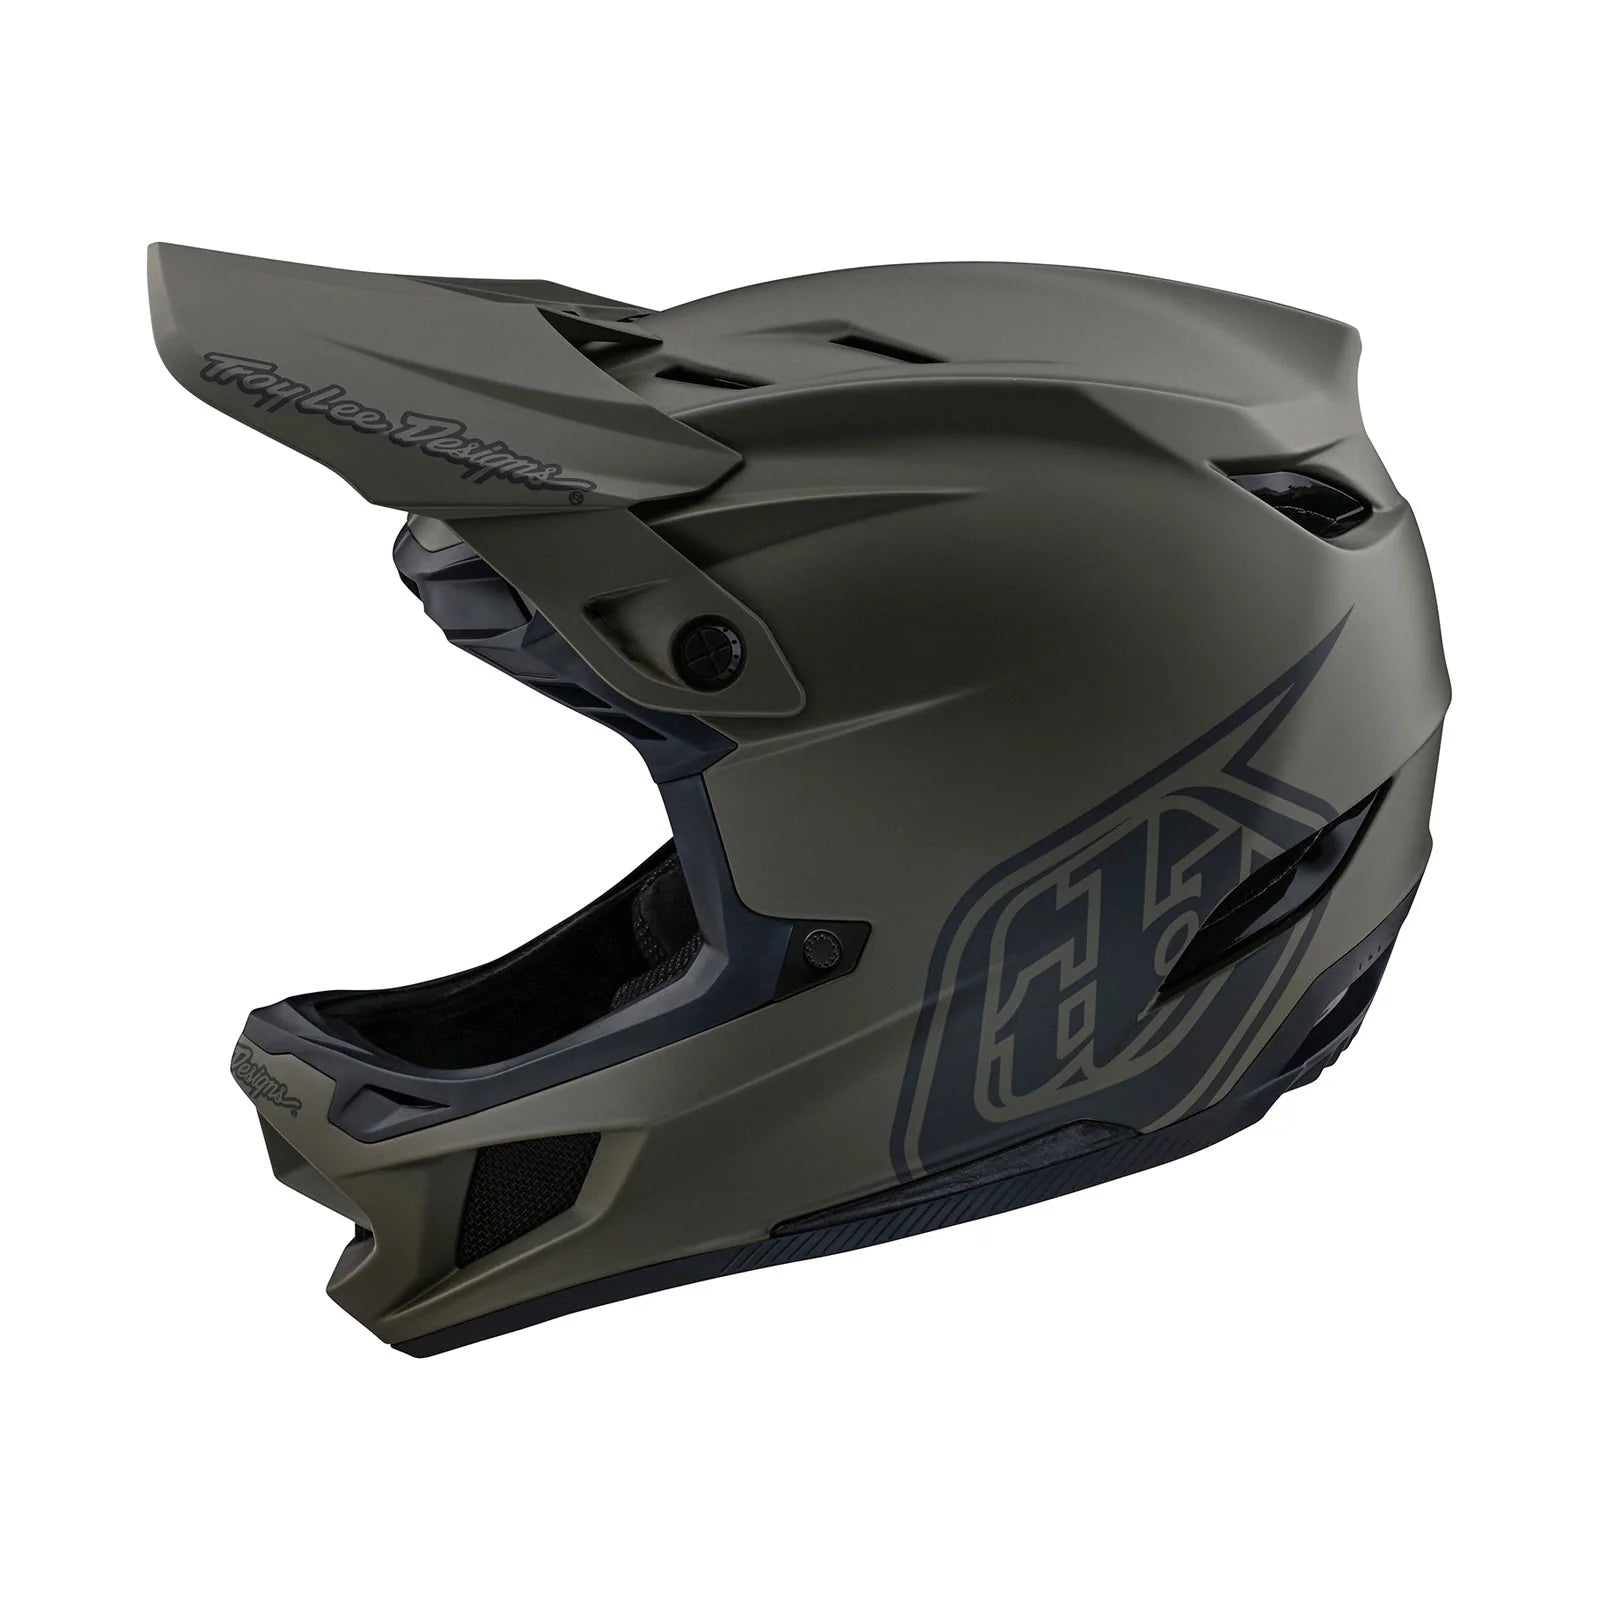 The TLD D4 AS Composite Helmet W/MIPS Stealth Tarmac is shown on a white background.